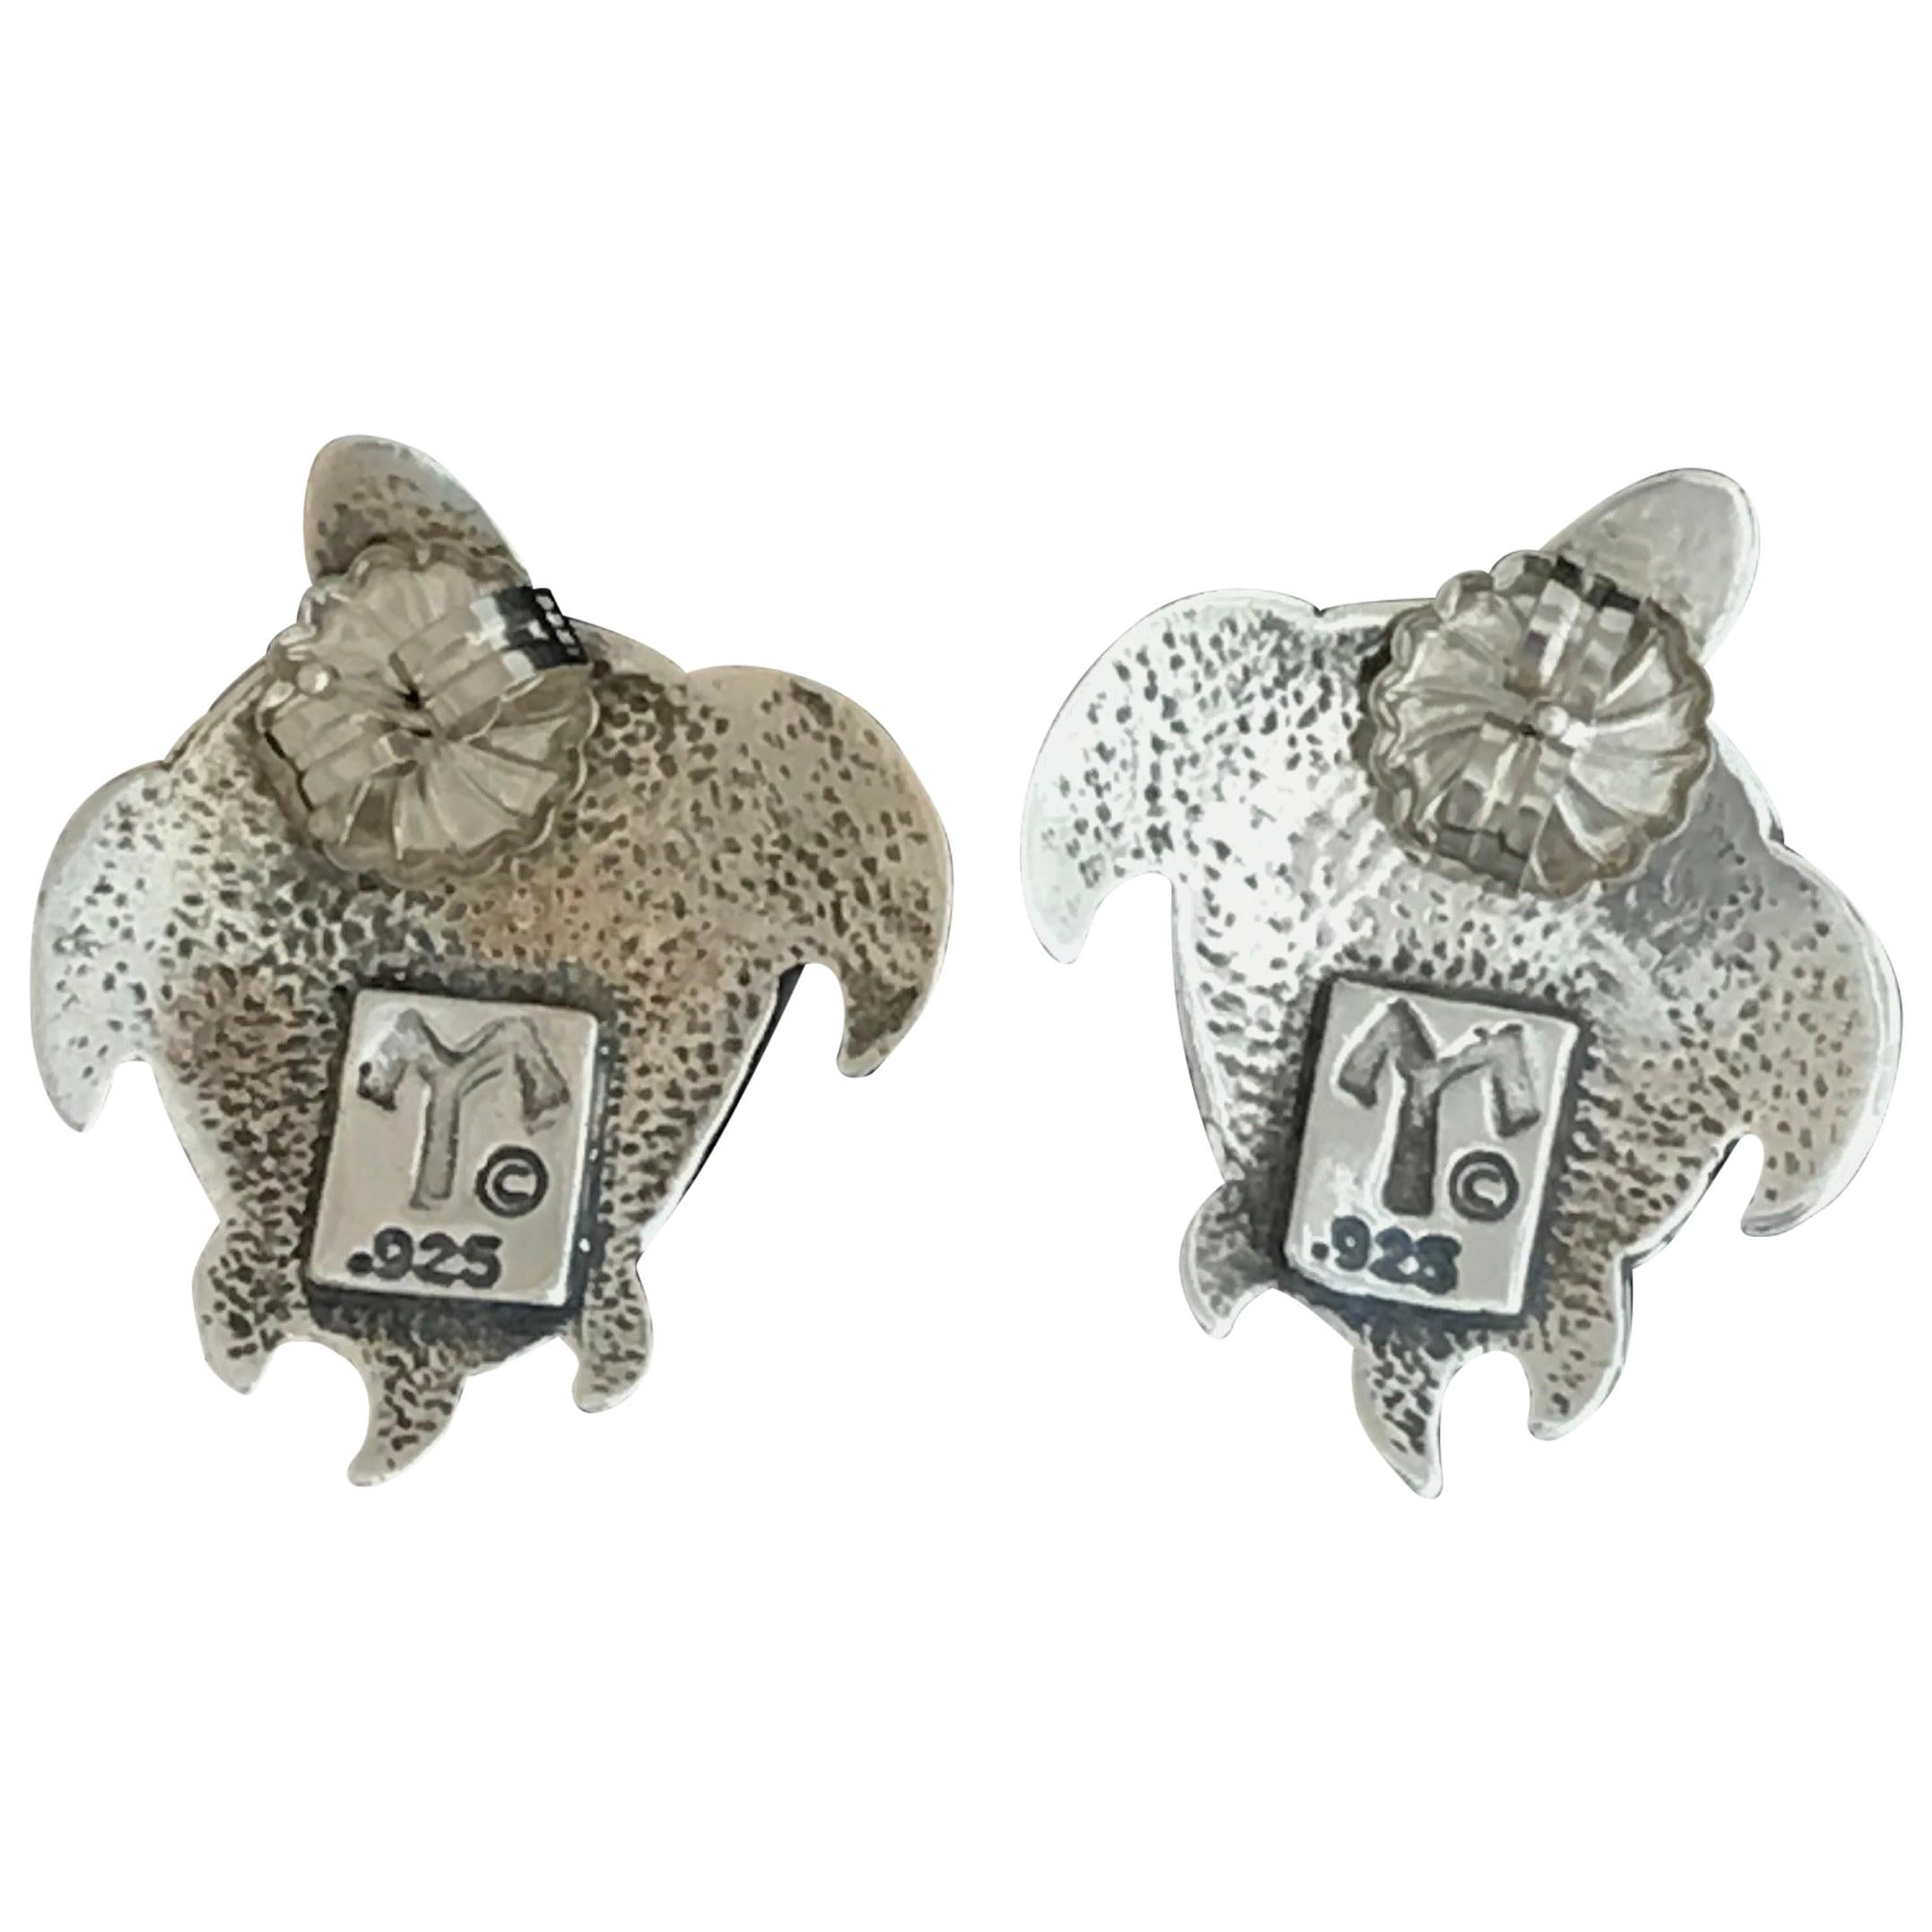 Turtle earrings, Melanie Yazzie cast silver post earrings Turtles contemporary 

Sterling Silver casting  Melanie A. Yazzie (Navajo-Diné) is a highly regarded multimedia artist known for her printmaking, paintings, sculpture, and jewelry designs.